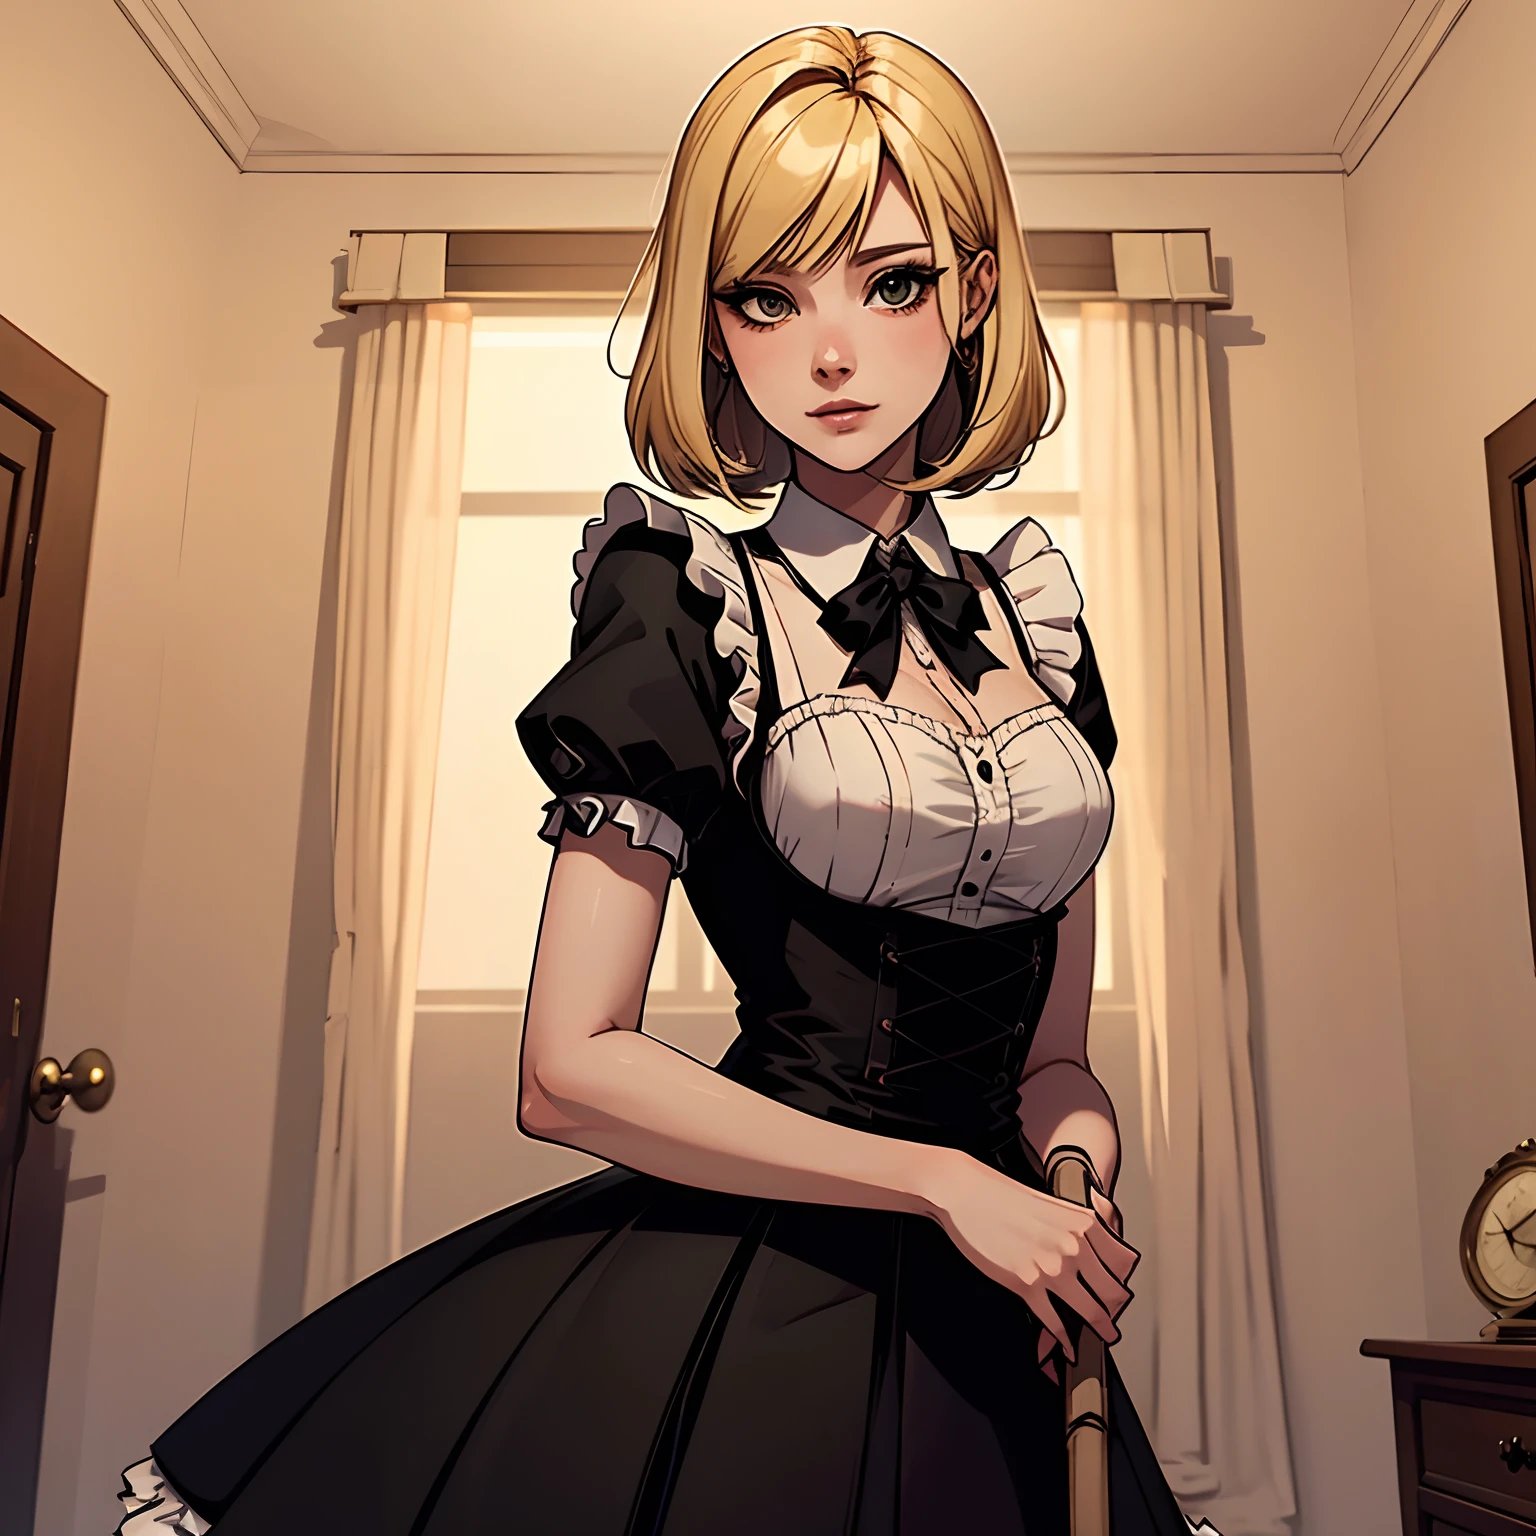 a young adult women, blond long_hime_cut_hairstyle, hazel eyes, black maid attire, cleaning mansion hall, broom, 4k, HD, detailed, masterpiece, medium shots